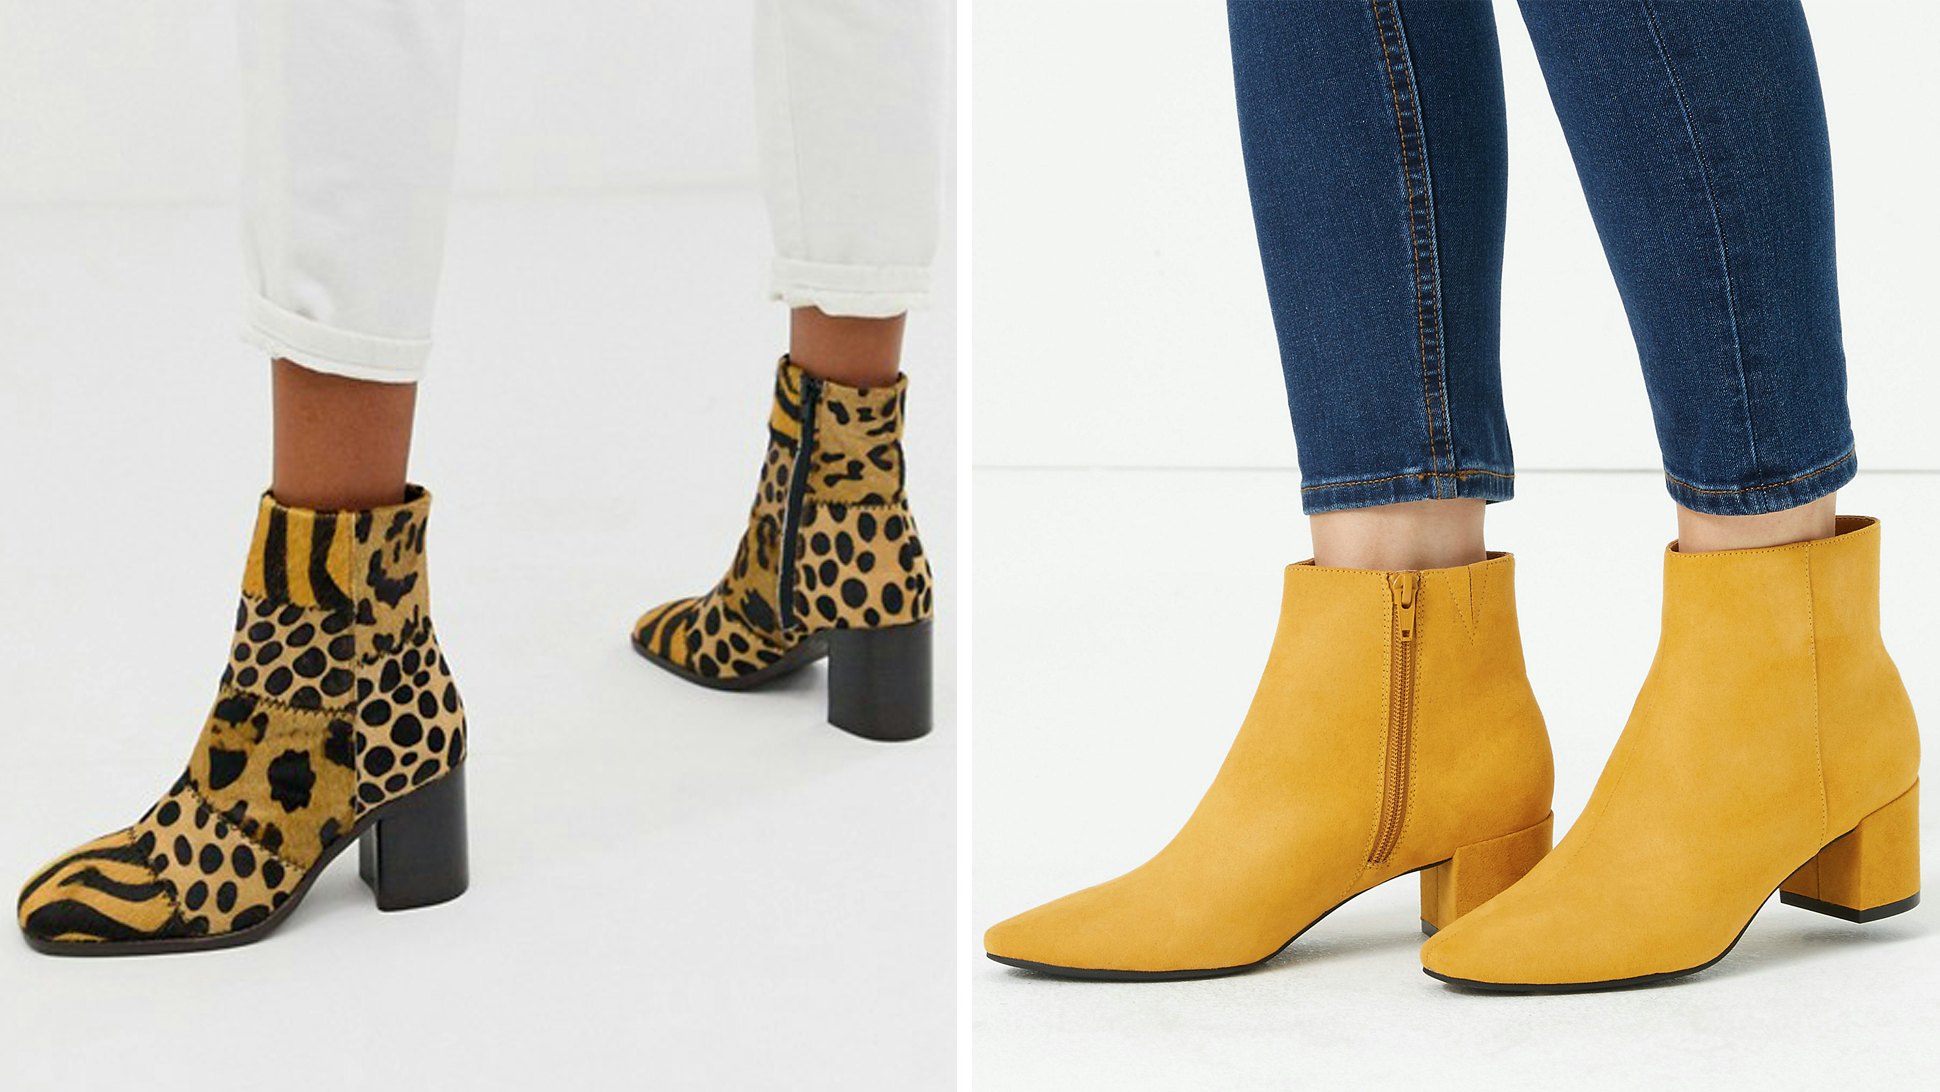 marks and spencer's ladies boots